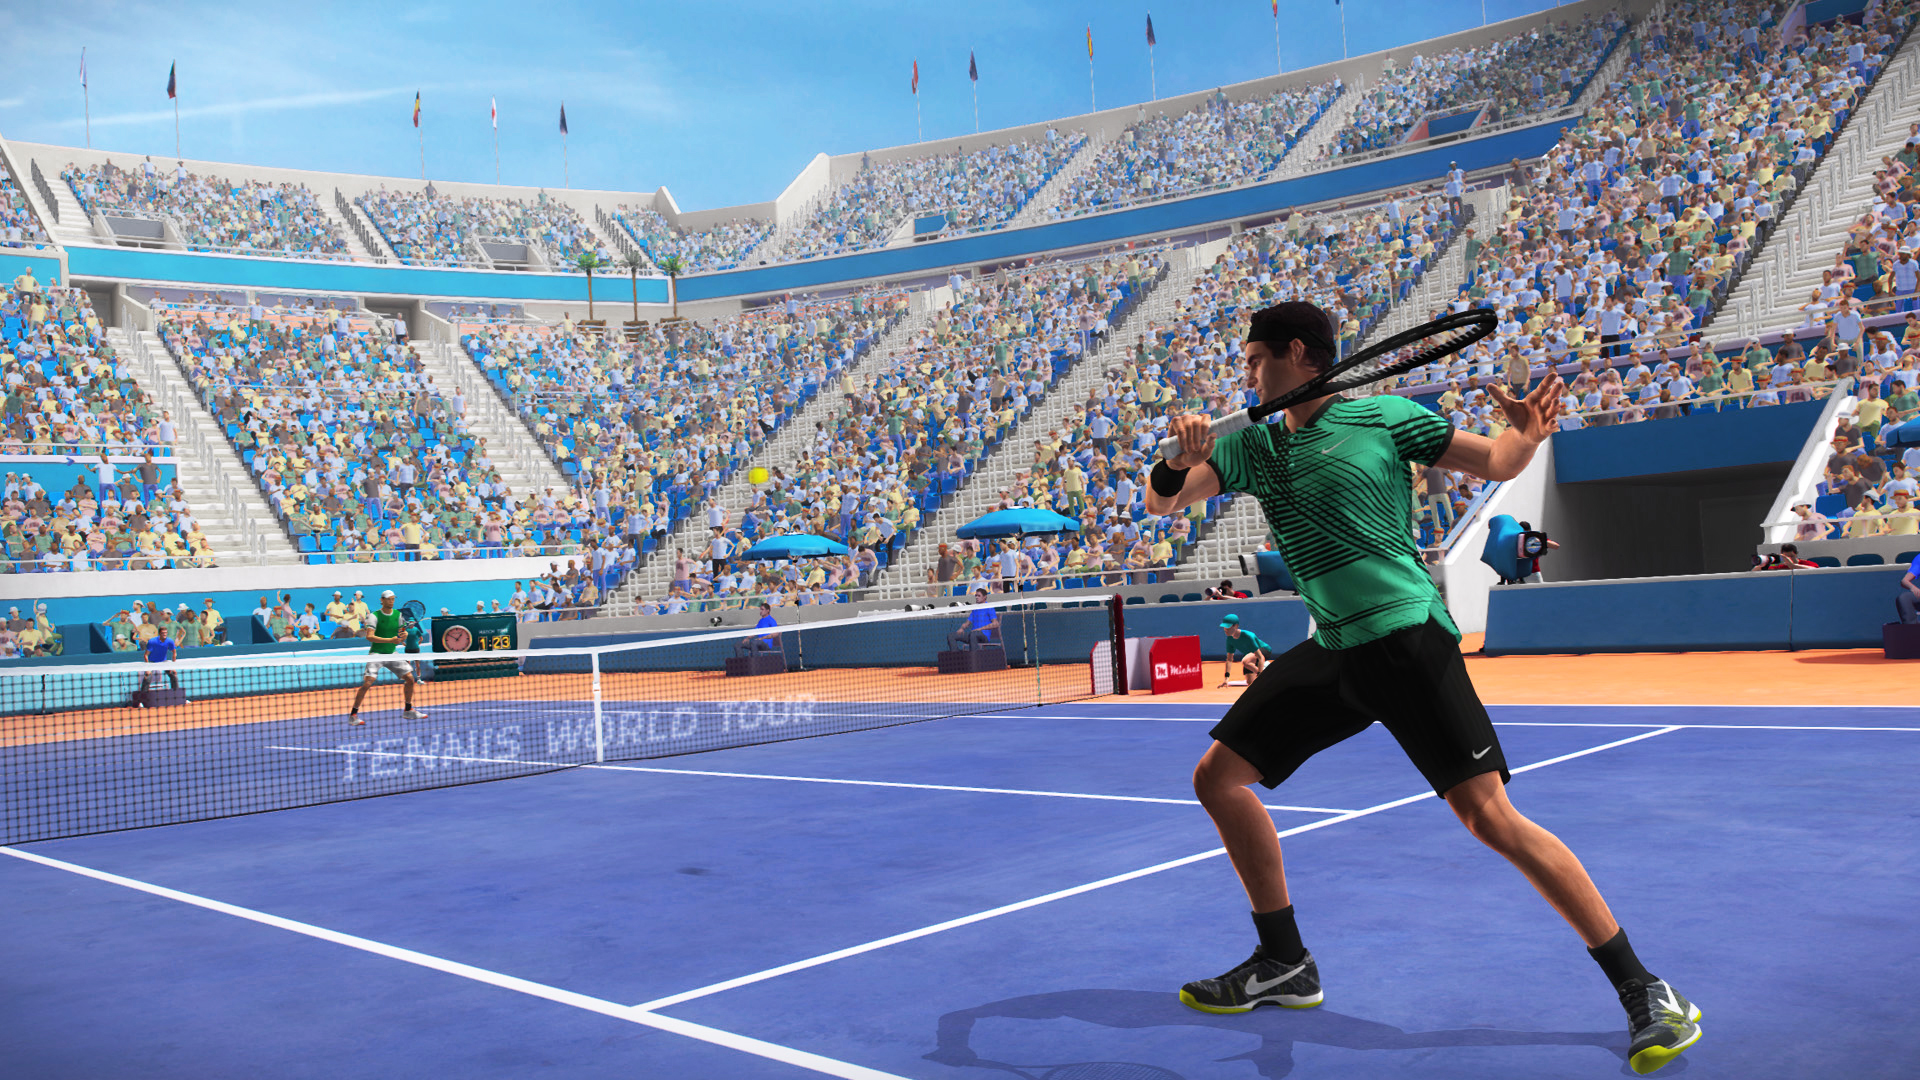 free tennis games for pc